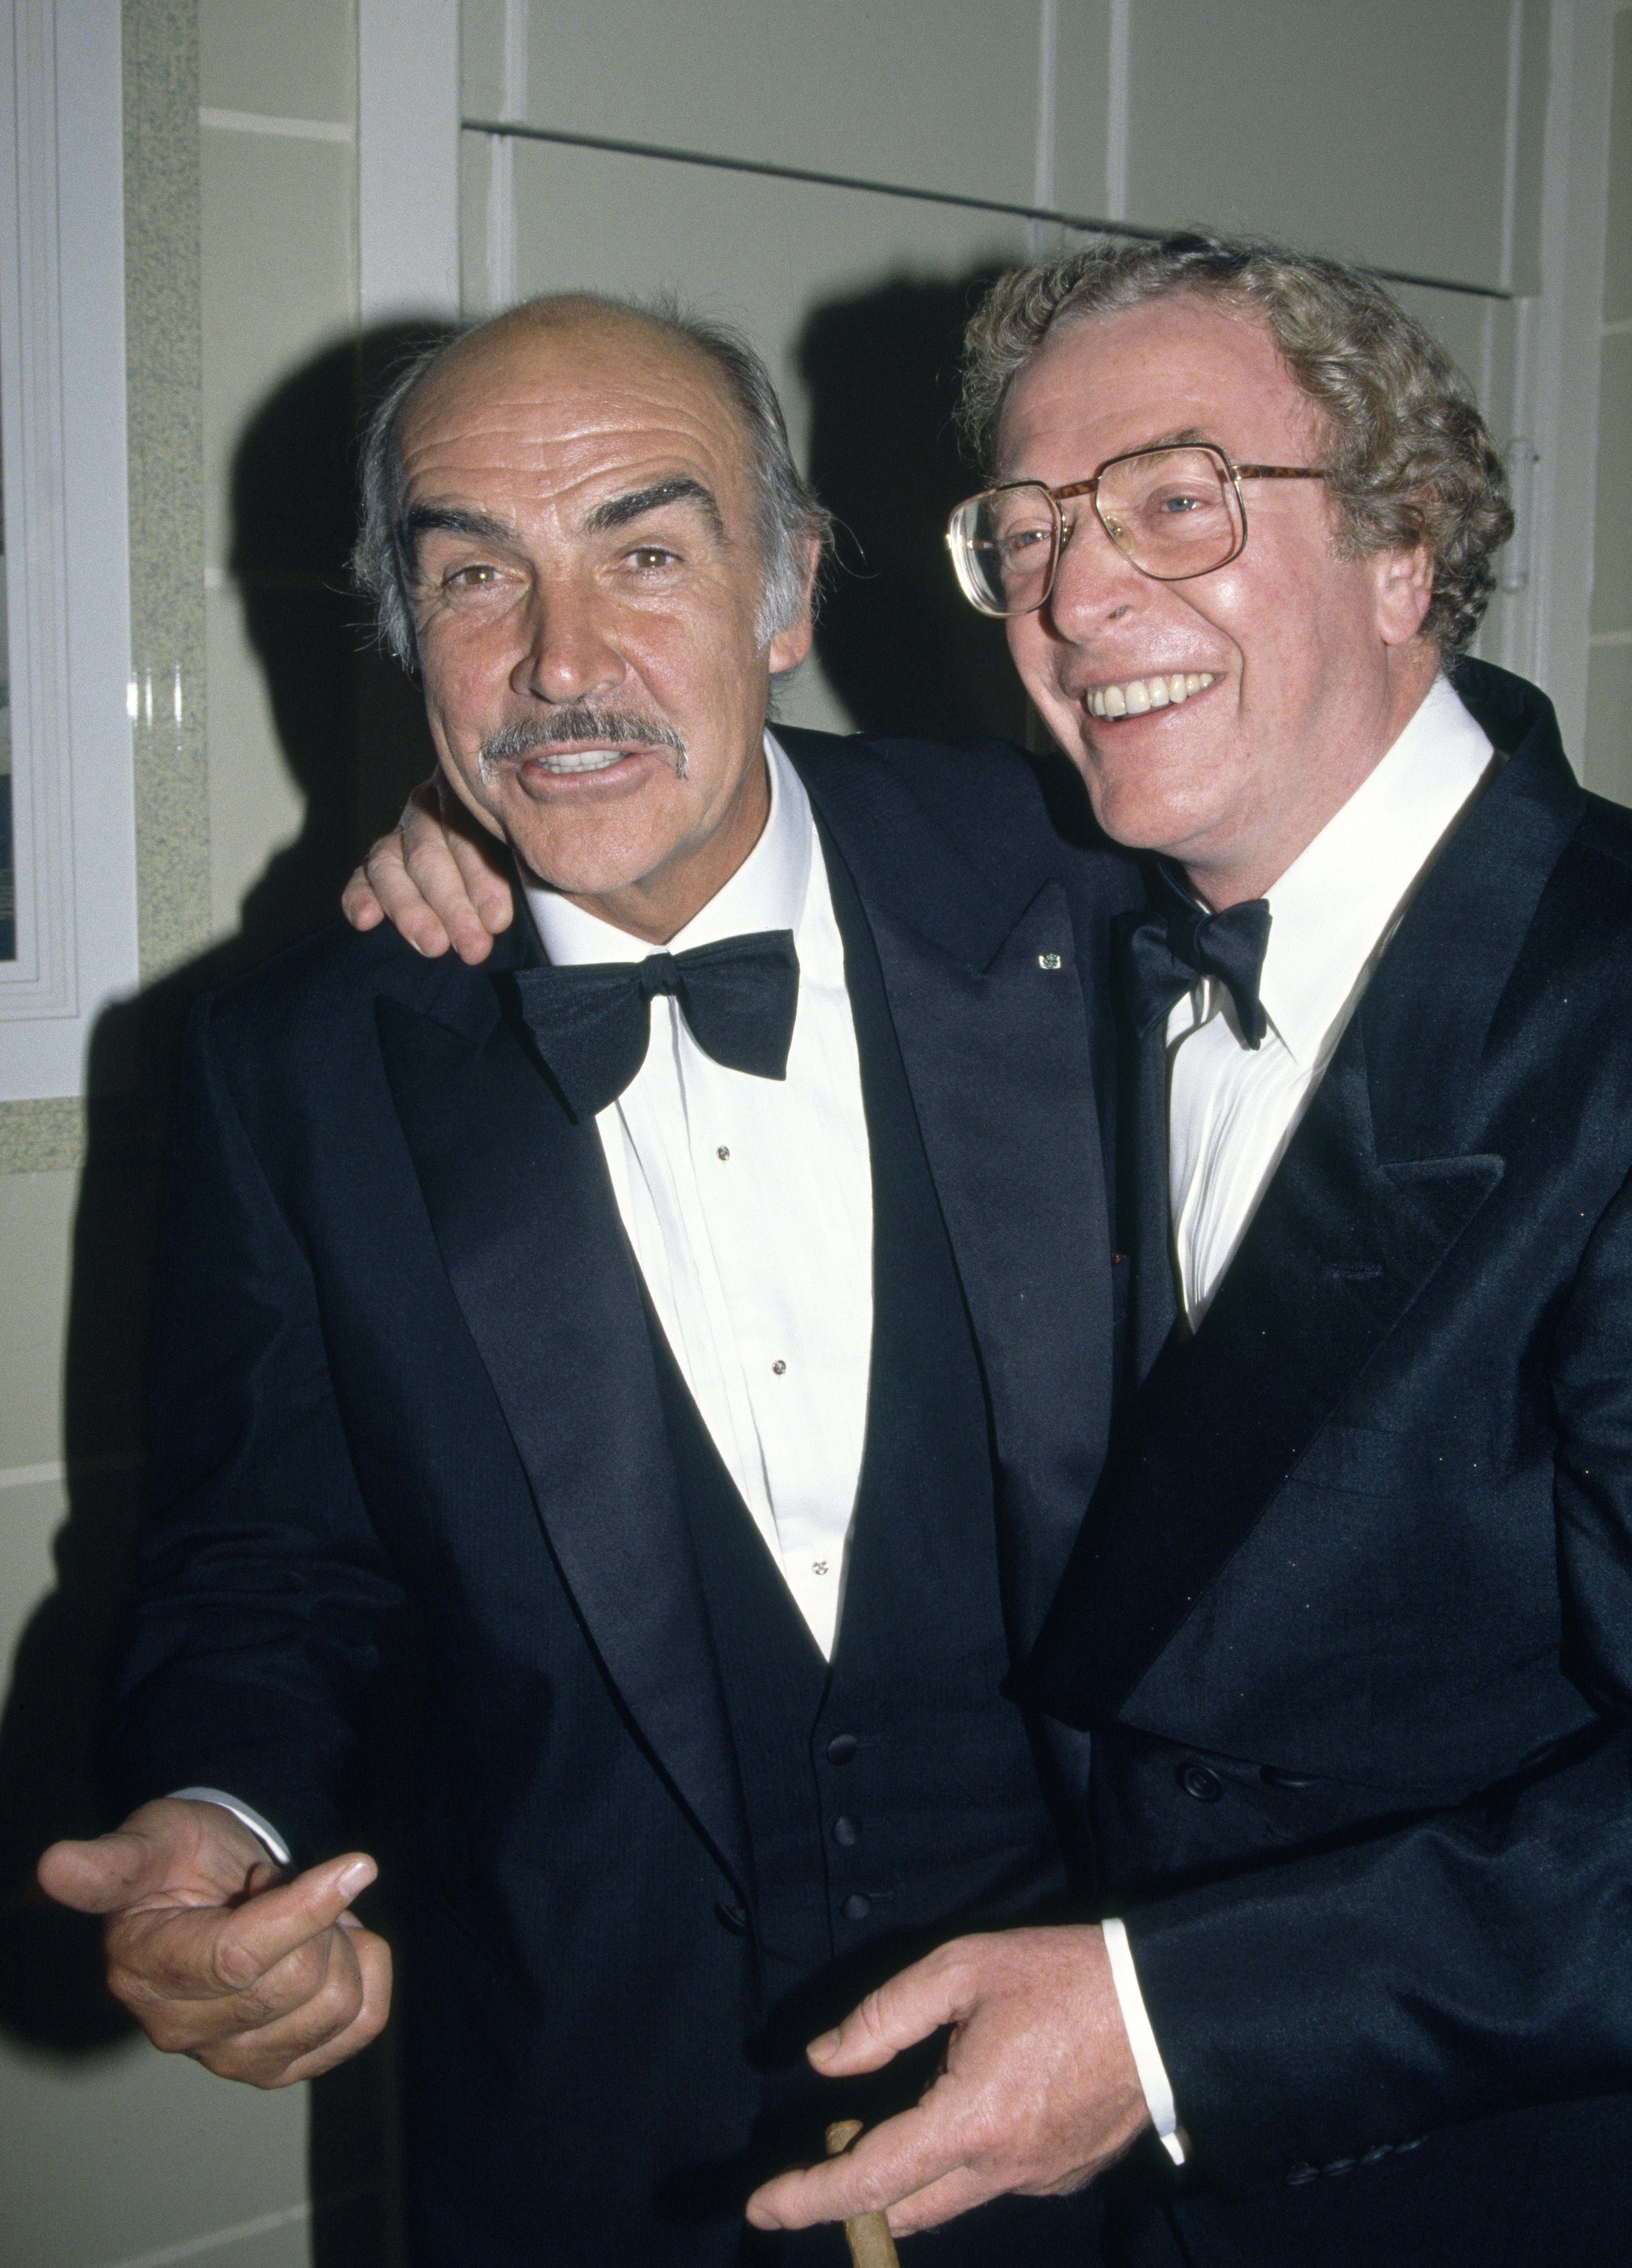 Sean Connery and Michael Caine during the BAFTA tribute evening for Sean Connery at the Odeon Cinema in Leicester Square on 7 October, 1990 | Photo: Getty Images